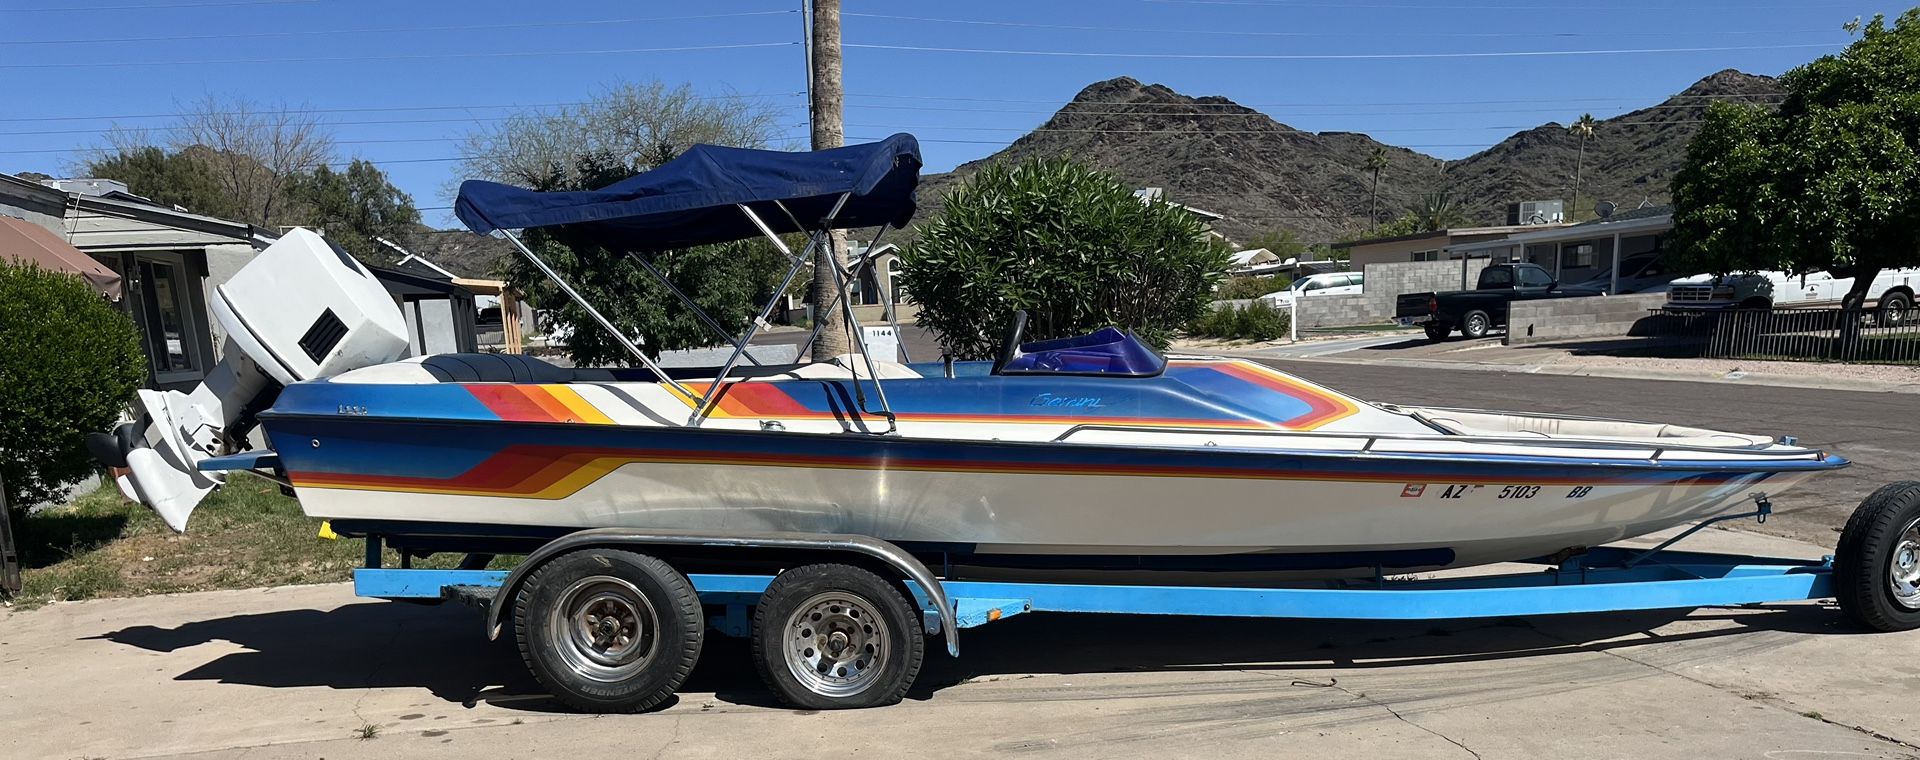 Gemini power Boat/185 HP Outboard With Trailer/ New Flooring & Carpet